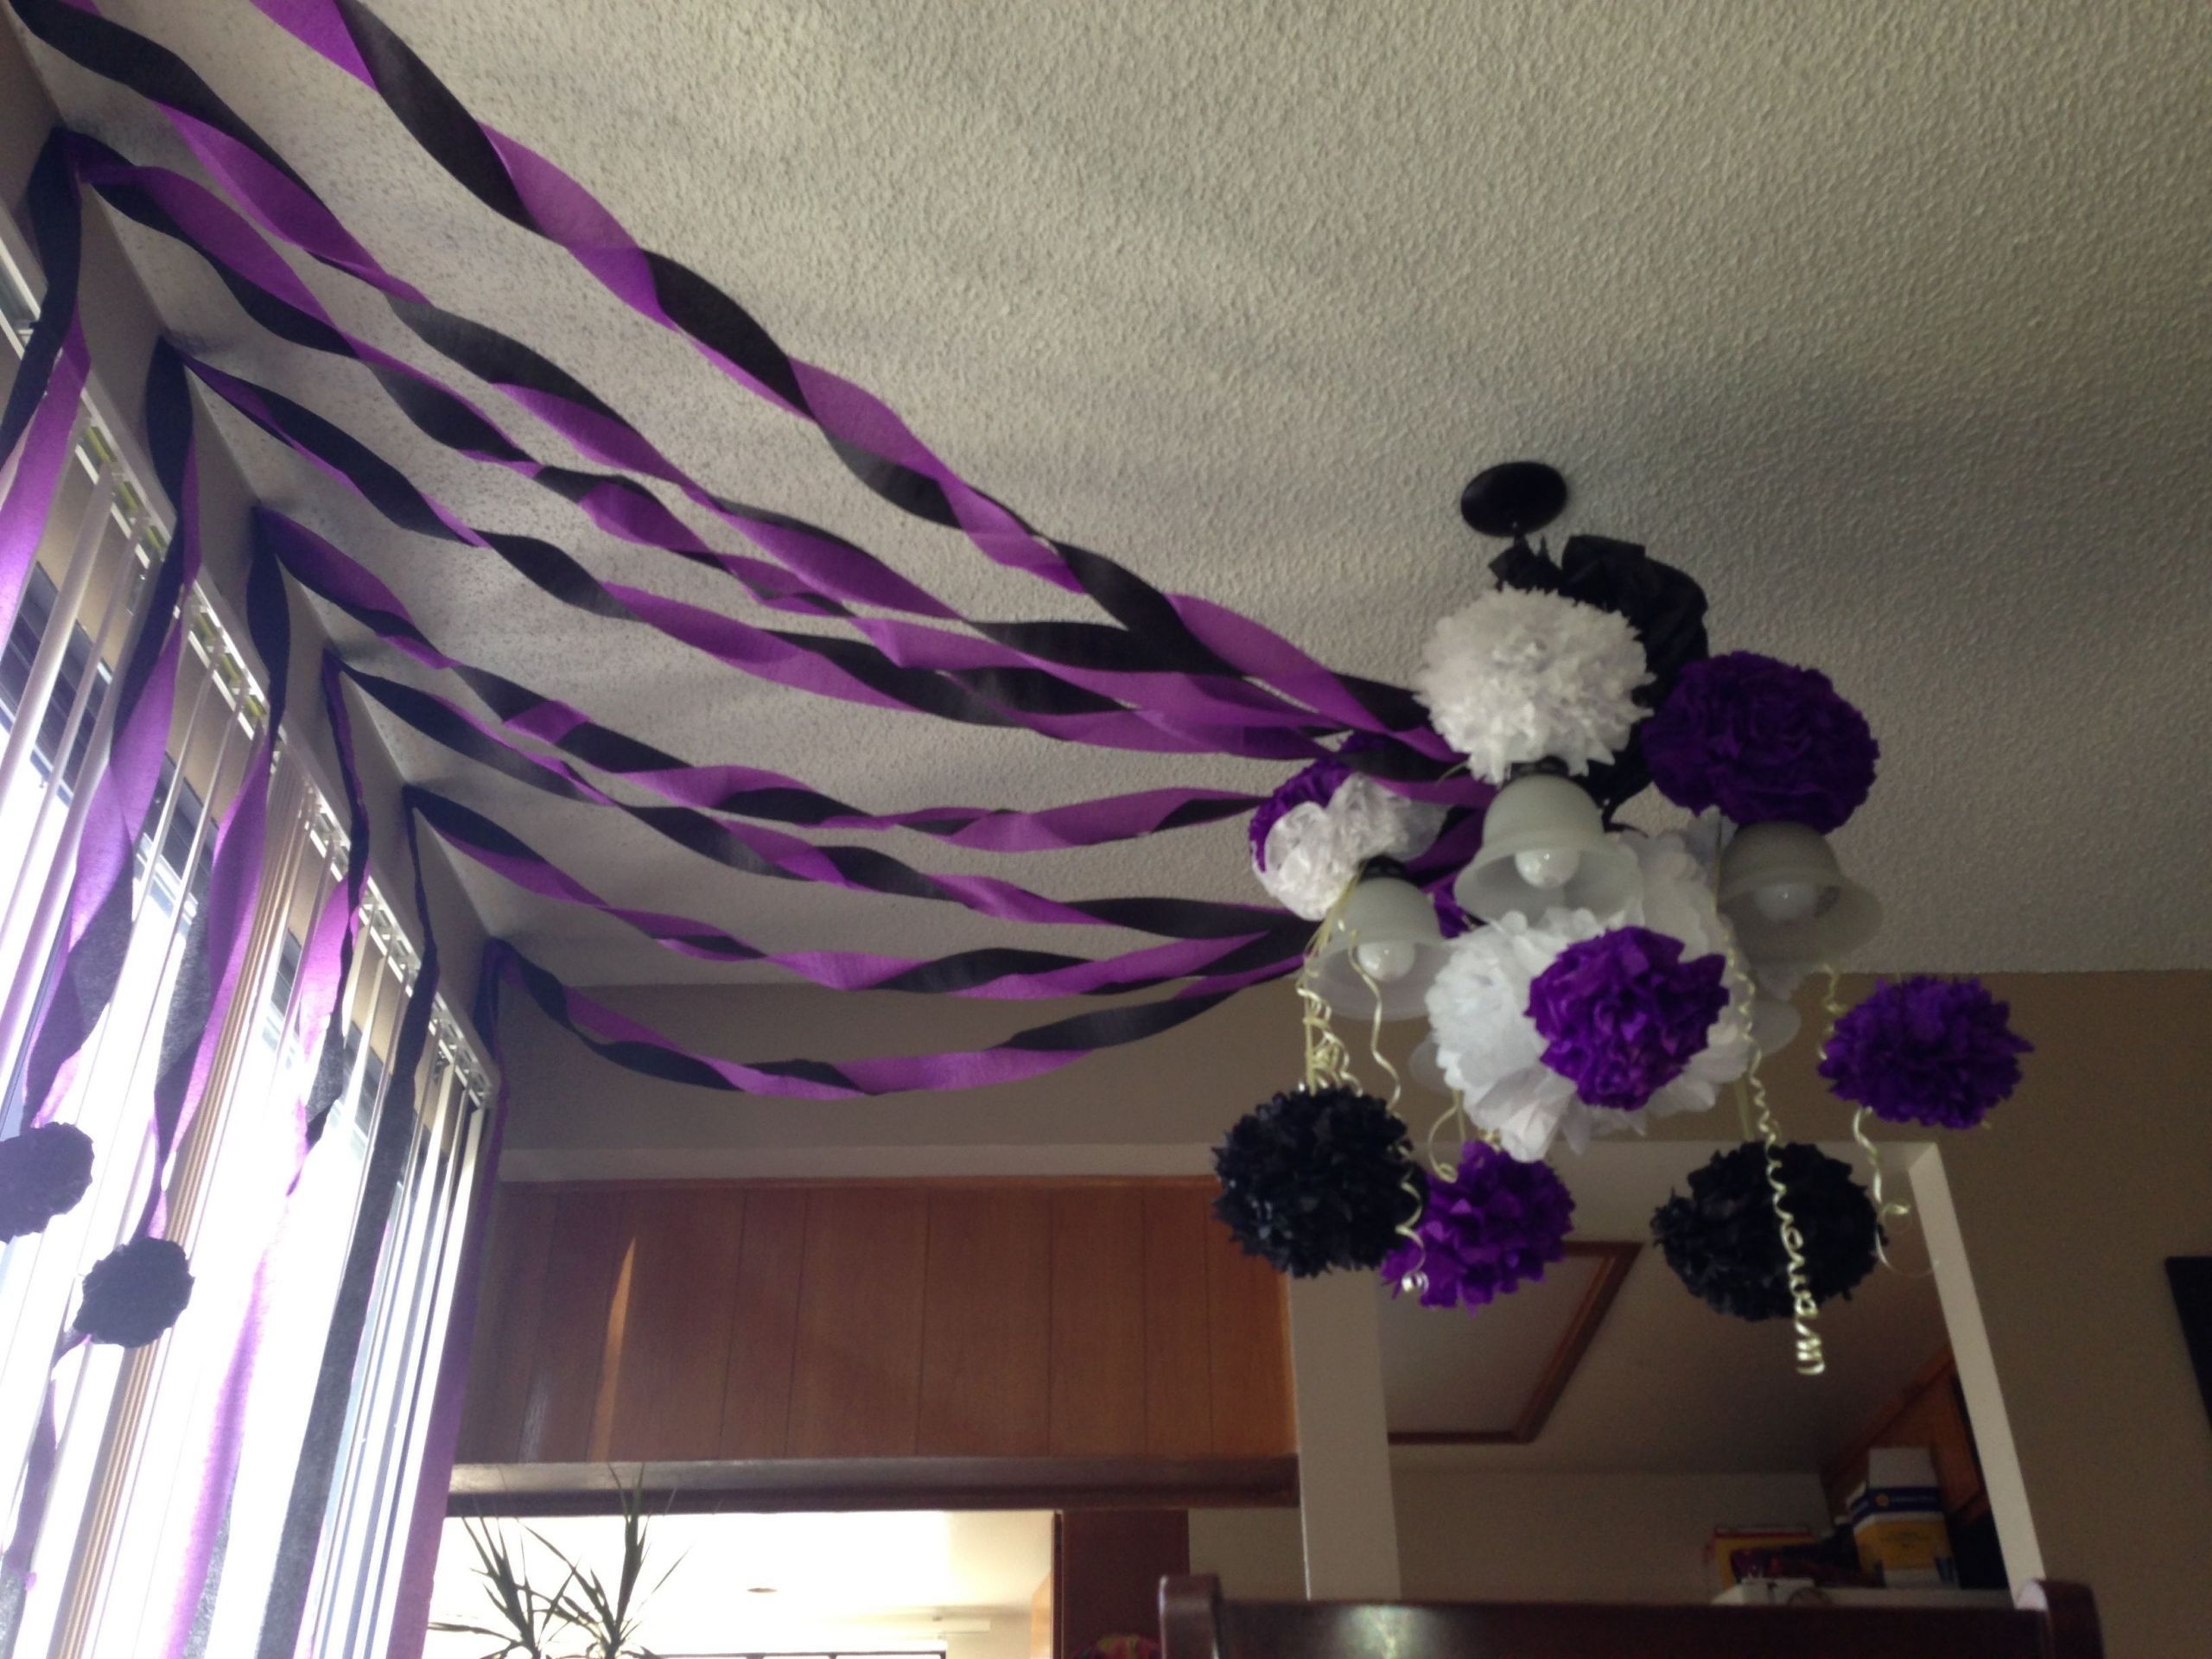 Nightmare Before Christmas Baby Shower Party Ideas
 Decorating for nightmare before Christmas baby shower For